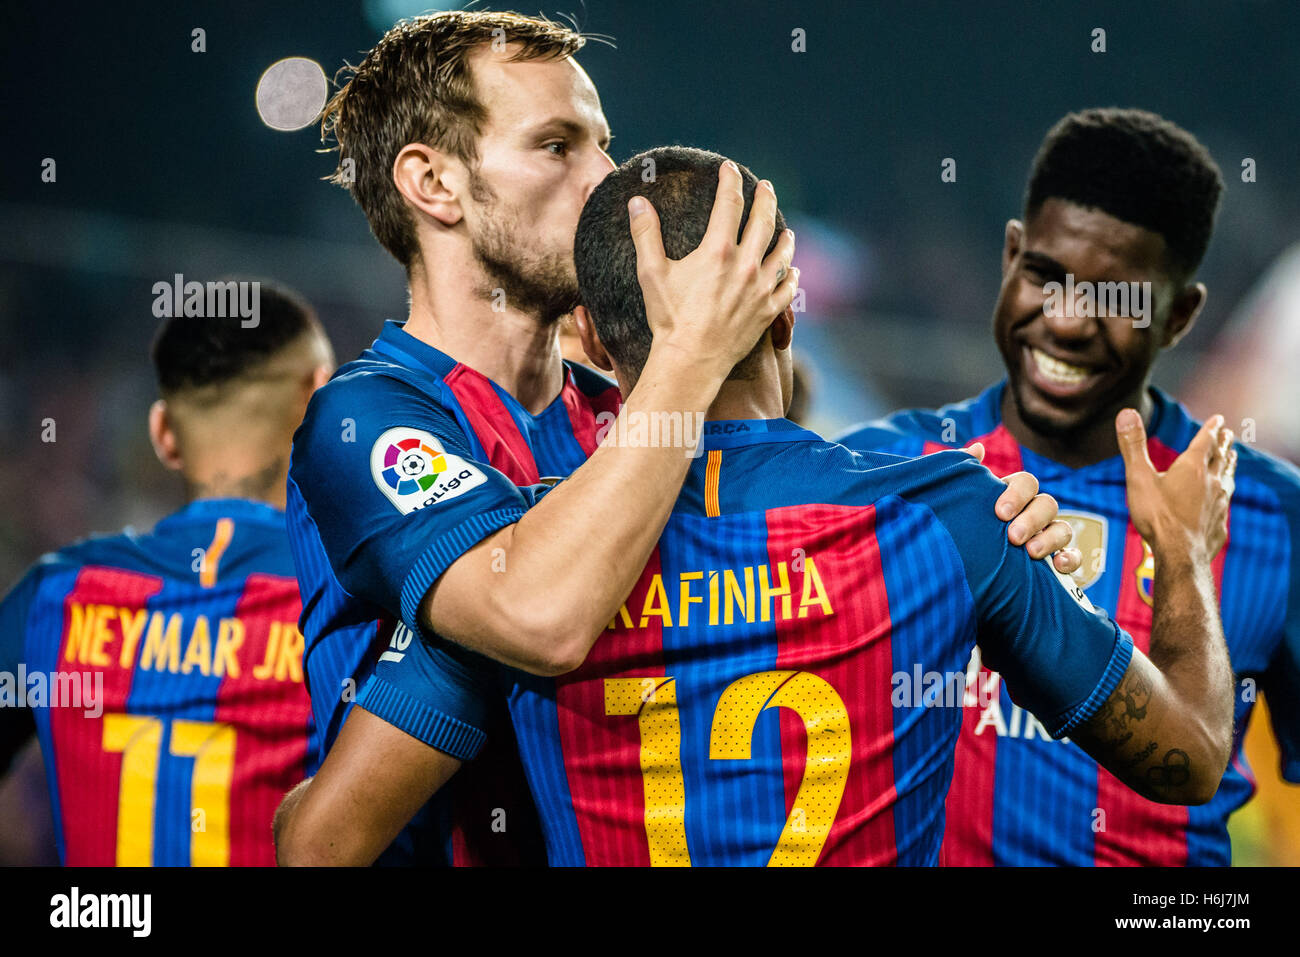 Barcelona, Catalonia, Spain. 29th Oct, 2016. FC Barcelona midfielder RAFINHA celebrates his goal with teammates during the LaLiga match between FC Barcelona and Granada CF at the Camp Nou stadium in Barcelona © Matthias Oesterle/ZUMA Wire/Alamy Live News Stock Photo